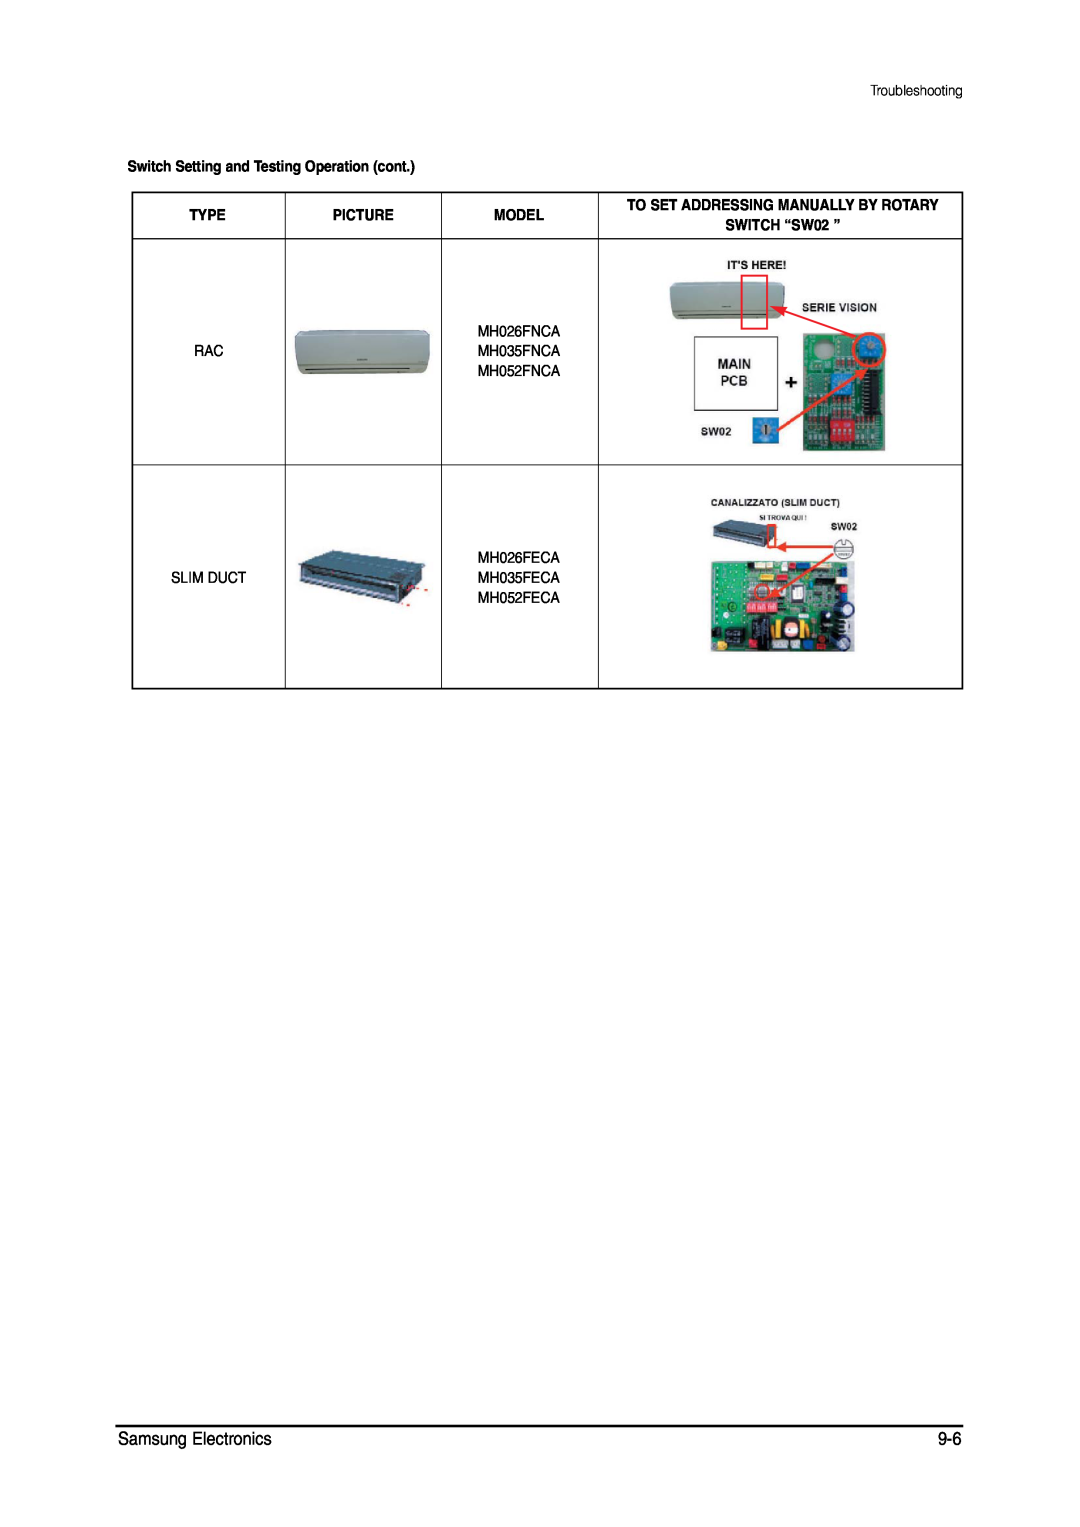 Samsung MH026FNCA Samsung Electronics, Switch Setting and Testing Operation cont, Type, Picture, Model, SWITCH “SW02 ” 